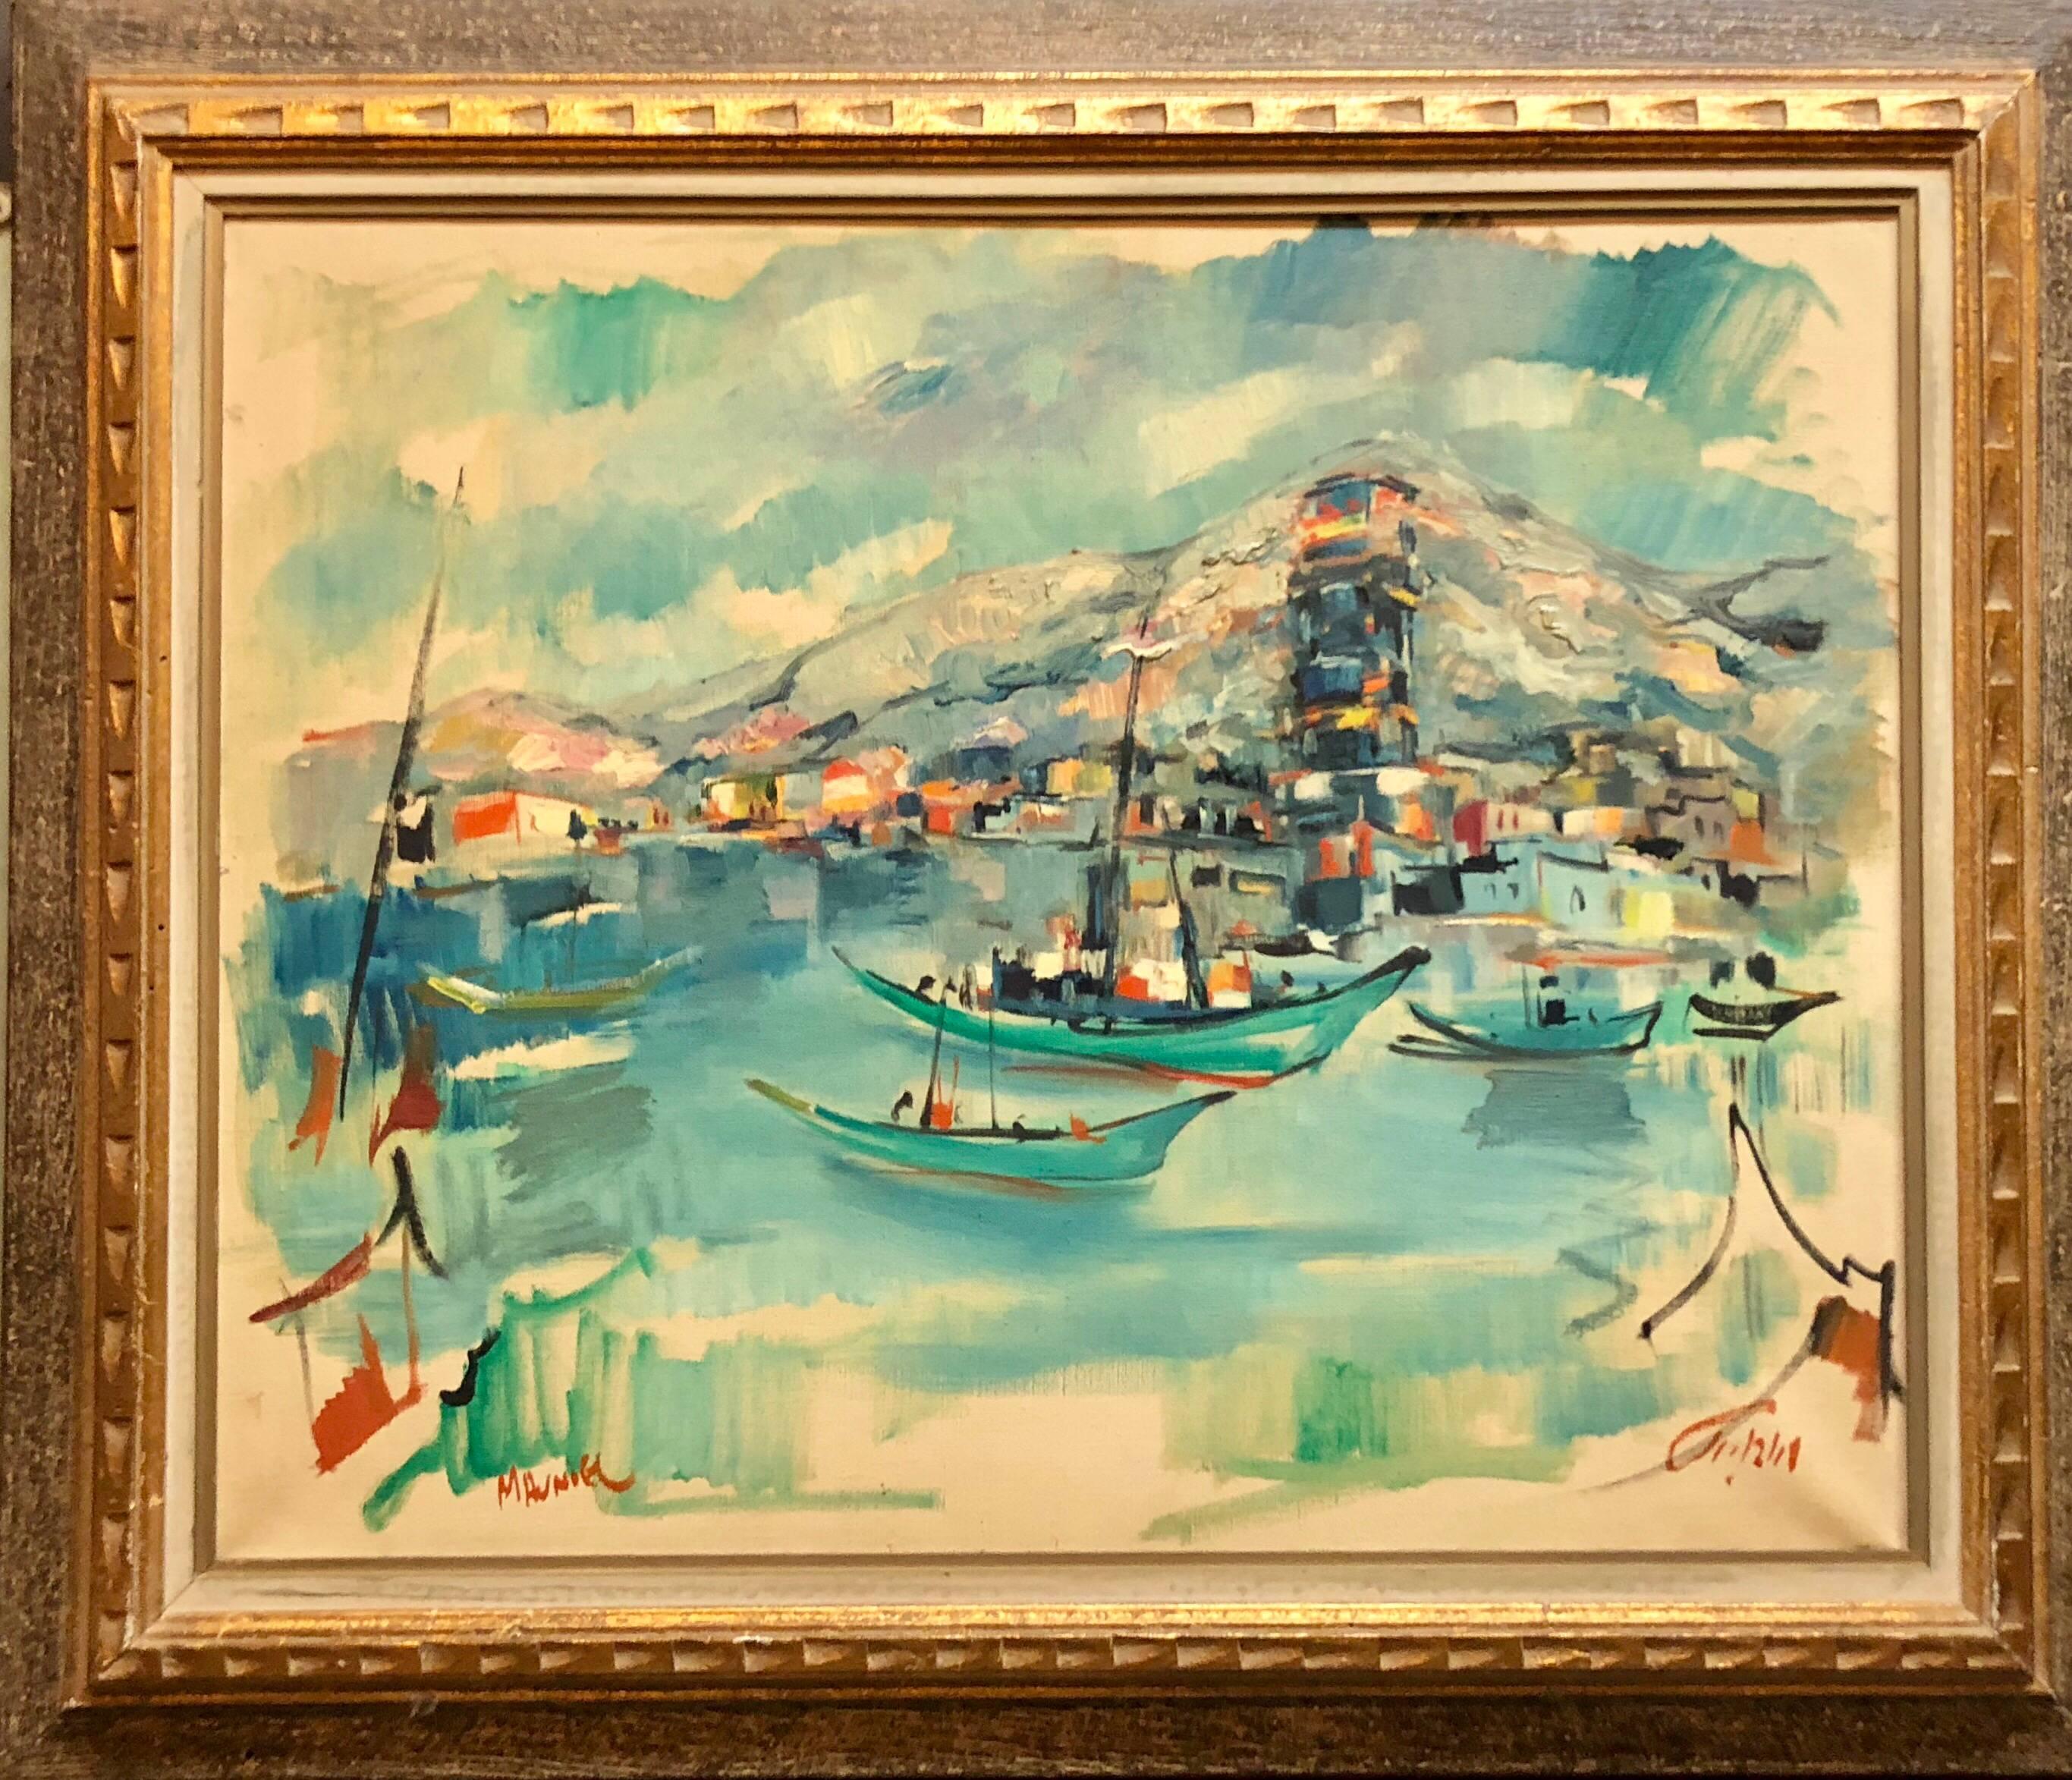 Seascape with mountain and boats in harbour. it is signed in hebrew and English. it is not dated.

MORDECHAI AVNIEL
Minsk, Belarus, b. 1900, d. 1989
Mordecai Dickstein (later Avniel) was born in 1900 in Minsk, present-day Belarus. He studied fine